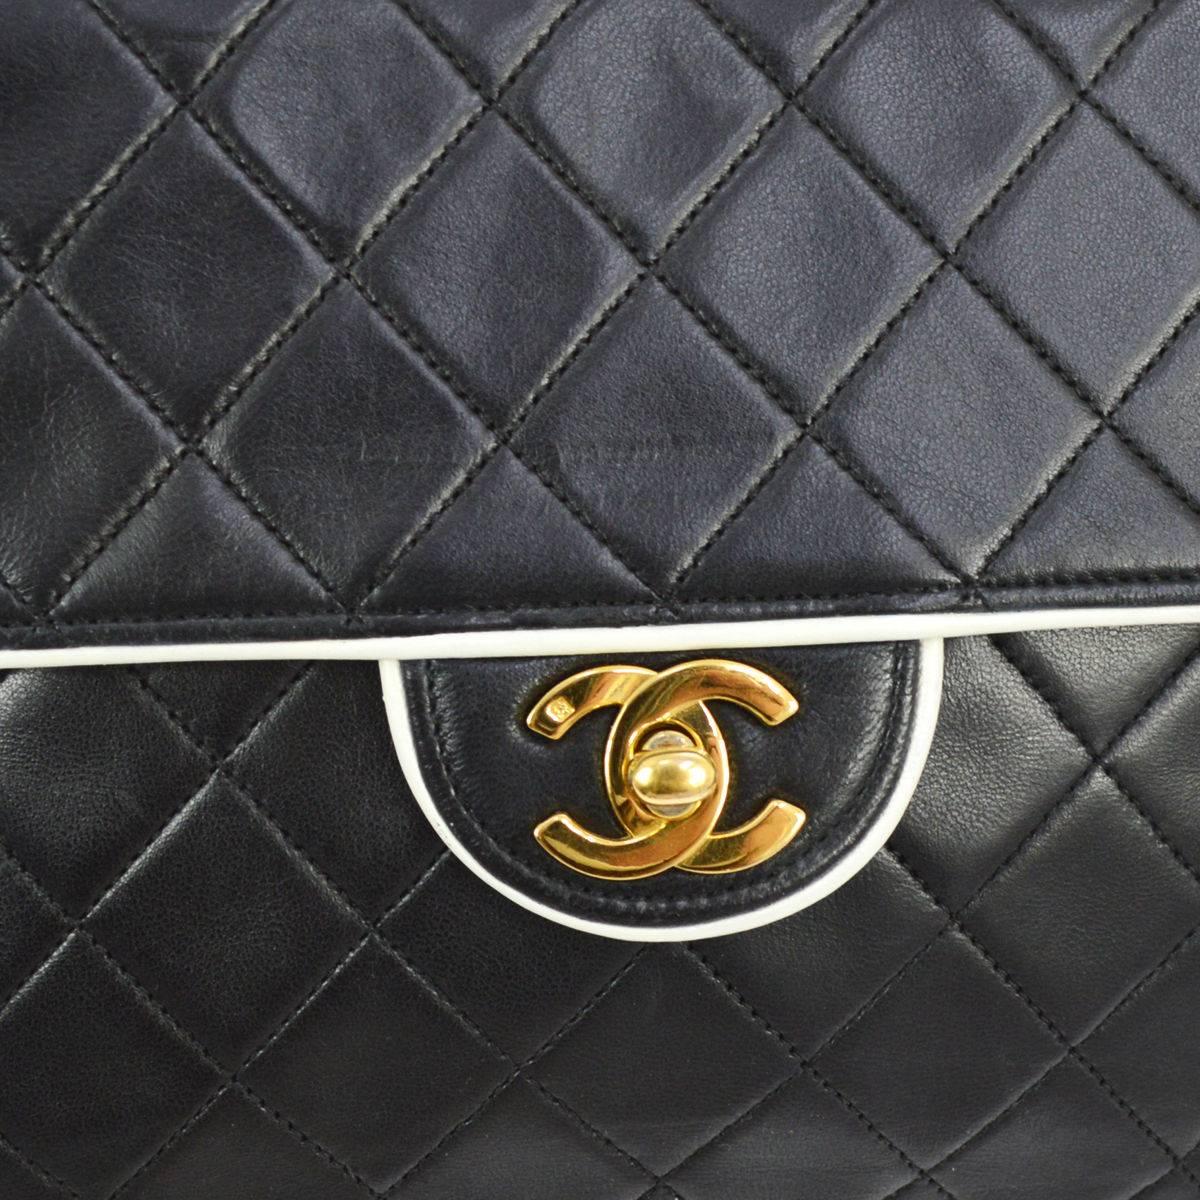 Chanel Vintage Black White Piping Gold Evening Shoulder Flap Bag 

Lambskin leather
Gold tone hardware
Turnlock closure
Leather lining
Made in France
Date code 5153505
Shoulder strap drop 17"
Measures 9" W x 7" H x 2.5" D